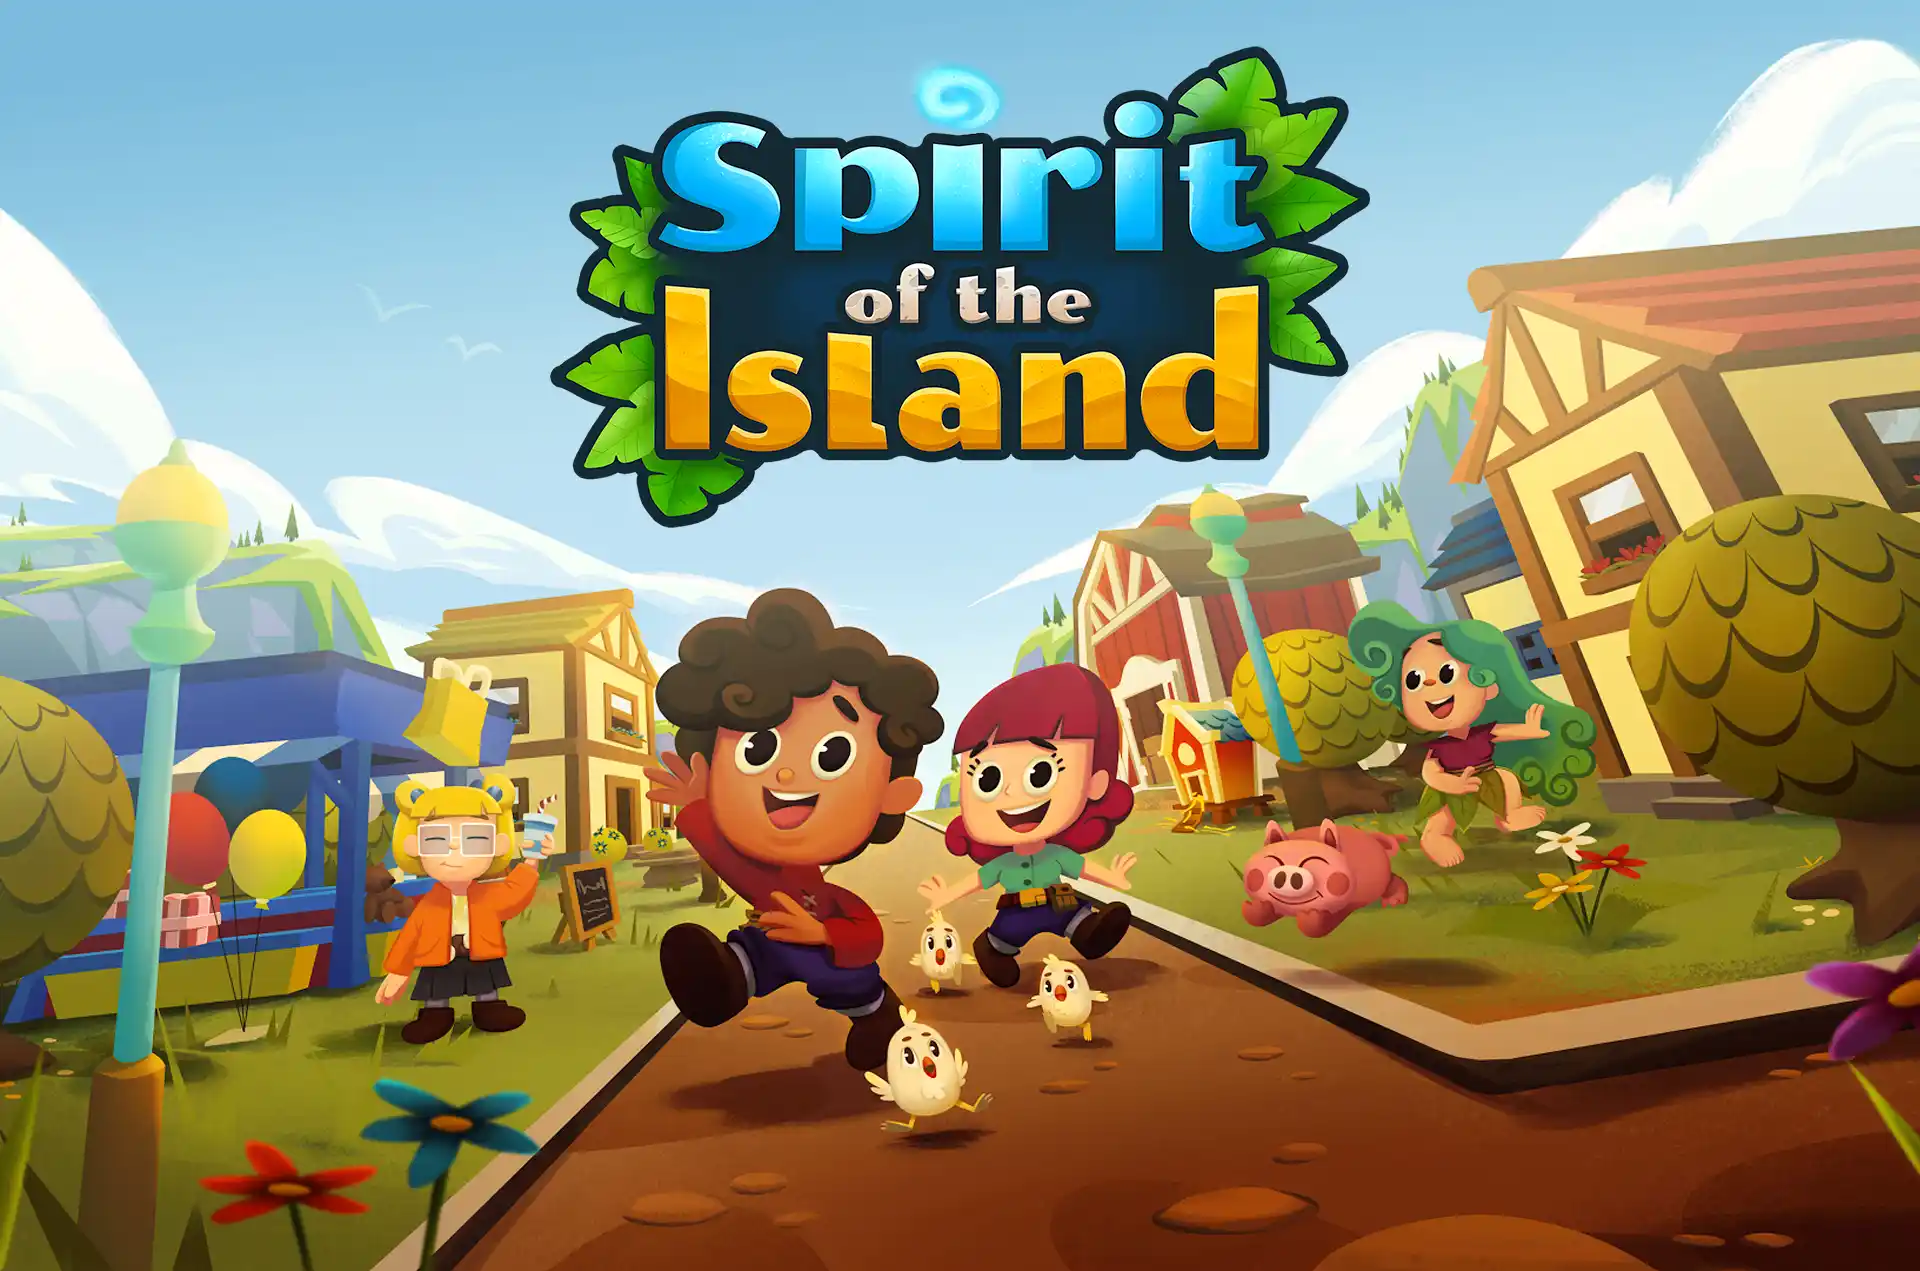 Presenting you Spirit of the Island